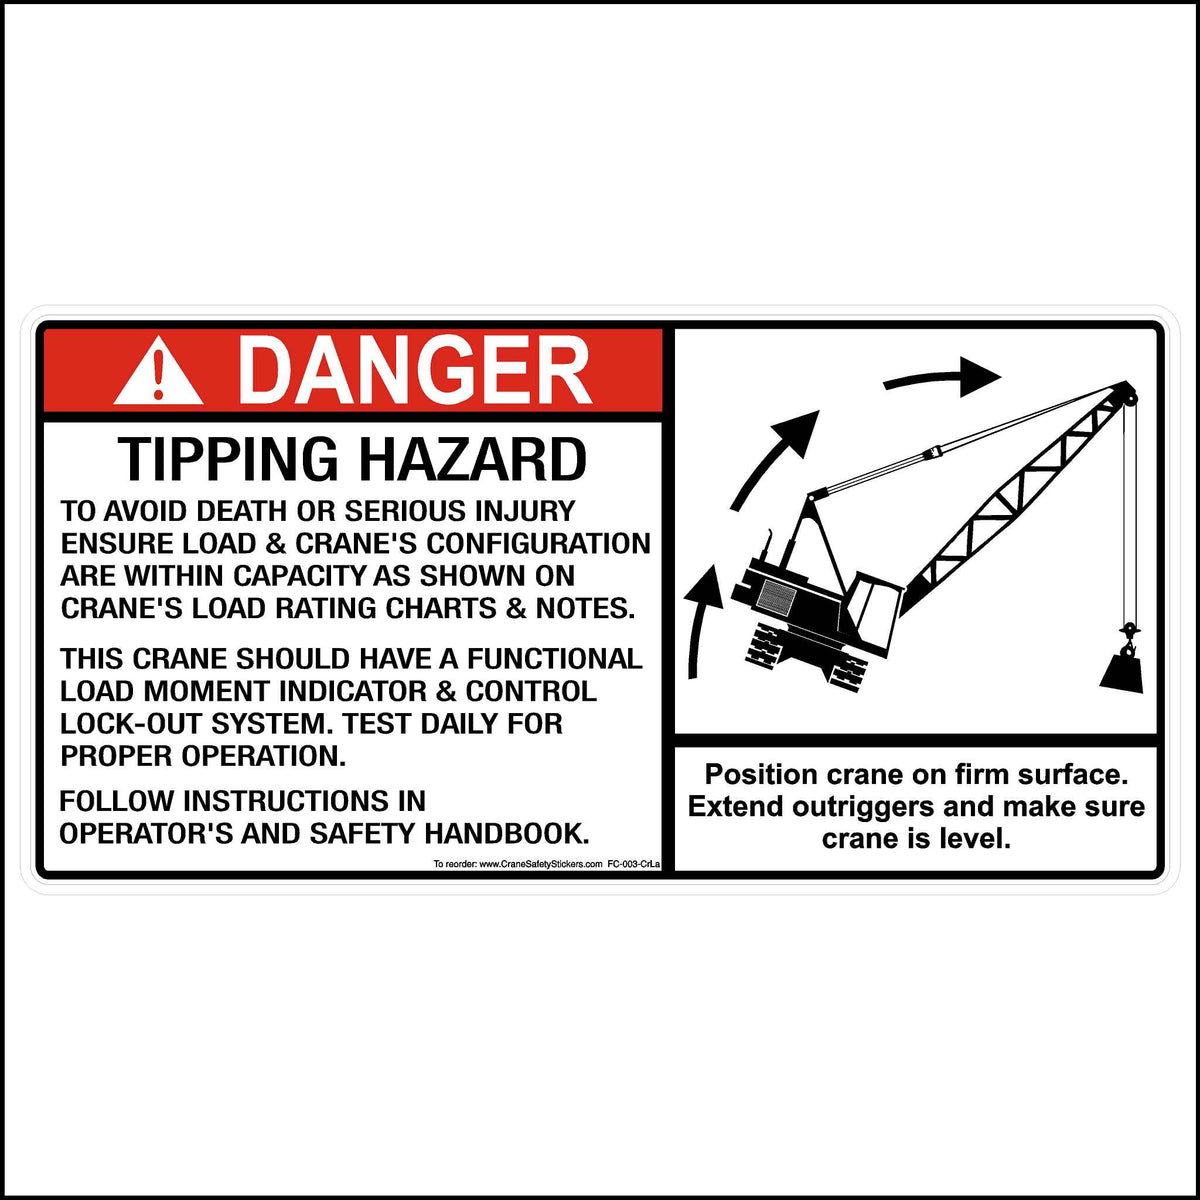 crawler crane tipping safety decal printed with.  DANGER Tipping Hazard. TO AVOID DEATH OR SERIOUS INJURY ENSURE LOAD &amp; CRANE&#39;S CONFIGURATION ARE WITHIN CAPACITY AS SHOWN ON CRANE&#39;S LOAD RATING CHARTS &amp; NOTES.  THIS CRANE SHOULD HAVE A FUNCTIONAL LOAD MOMENT INDICATOR &amp; CONTROL LOCK-OUT SYSTEM. TEST DAILY FOR PROPER OPERATION.  FOLLOW INSTRUCTIONS IN OPERATORS AND SAFETY HANDBOOK.  Position crane on firm surface. Extend outriggers and make sure crane is level.